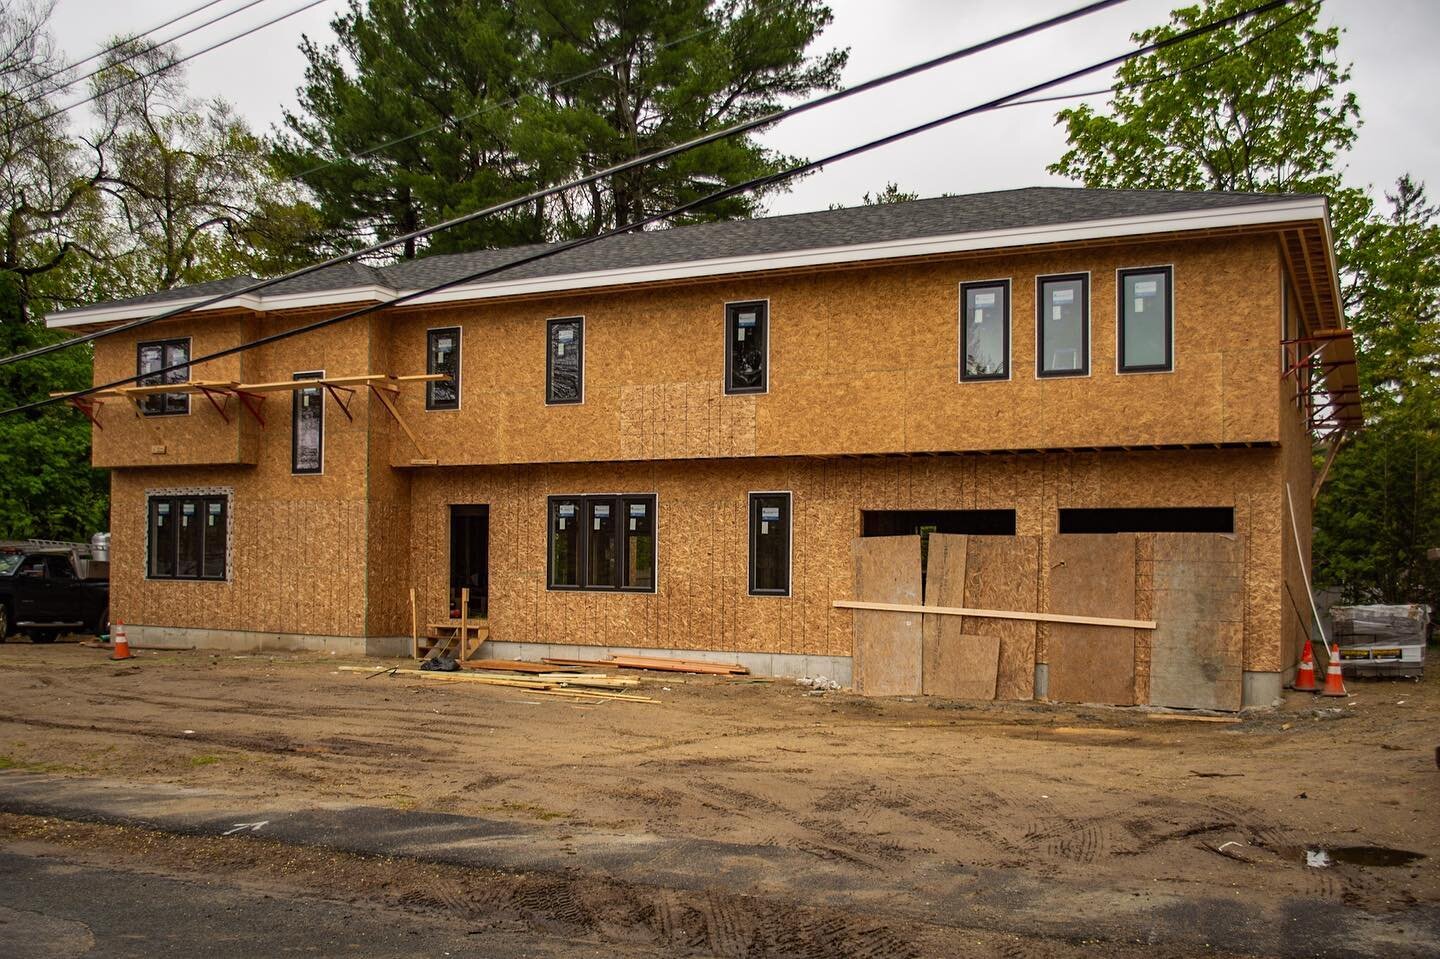 1 Liberty st is coming along great! 

5000+ sqft contemporary new construction with a finished basement, 5 beds, 4.5 baths, 2 car garage, in the highly desirable Wethersfield Neighborhood! 

Available to show! Inquiries:

781-697-7116
Vincent Nardone